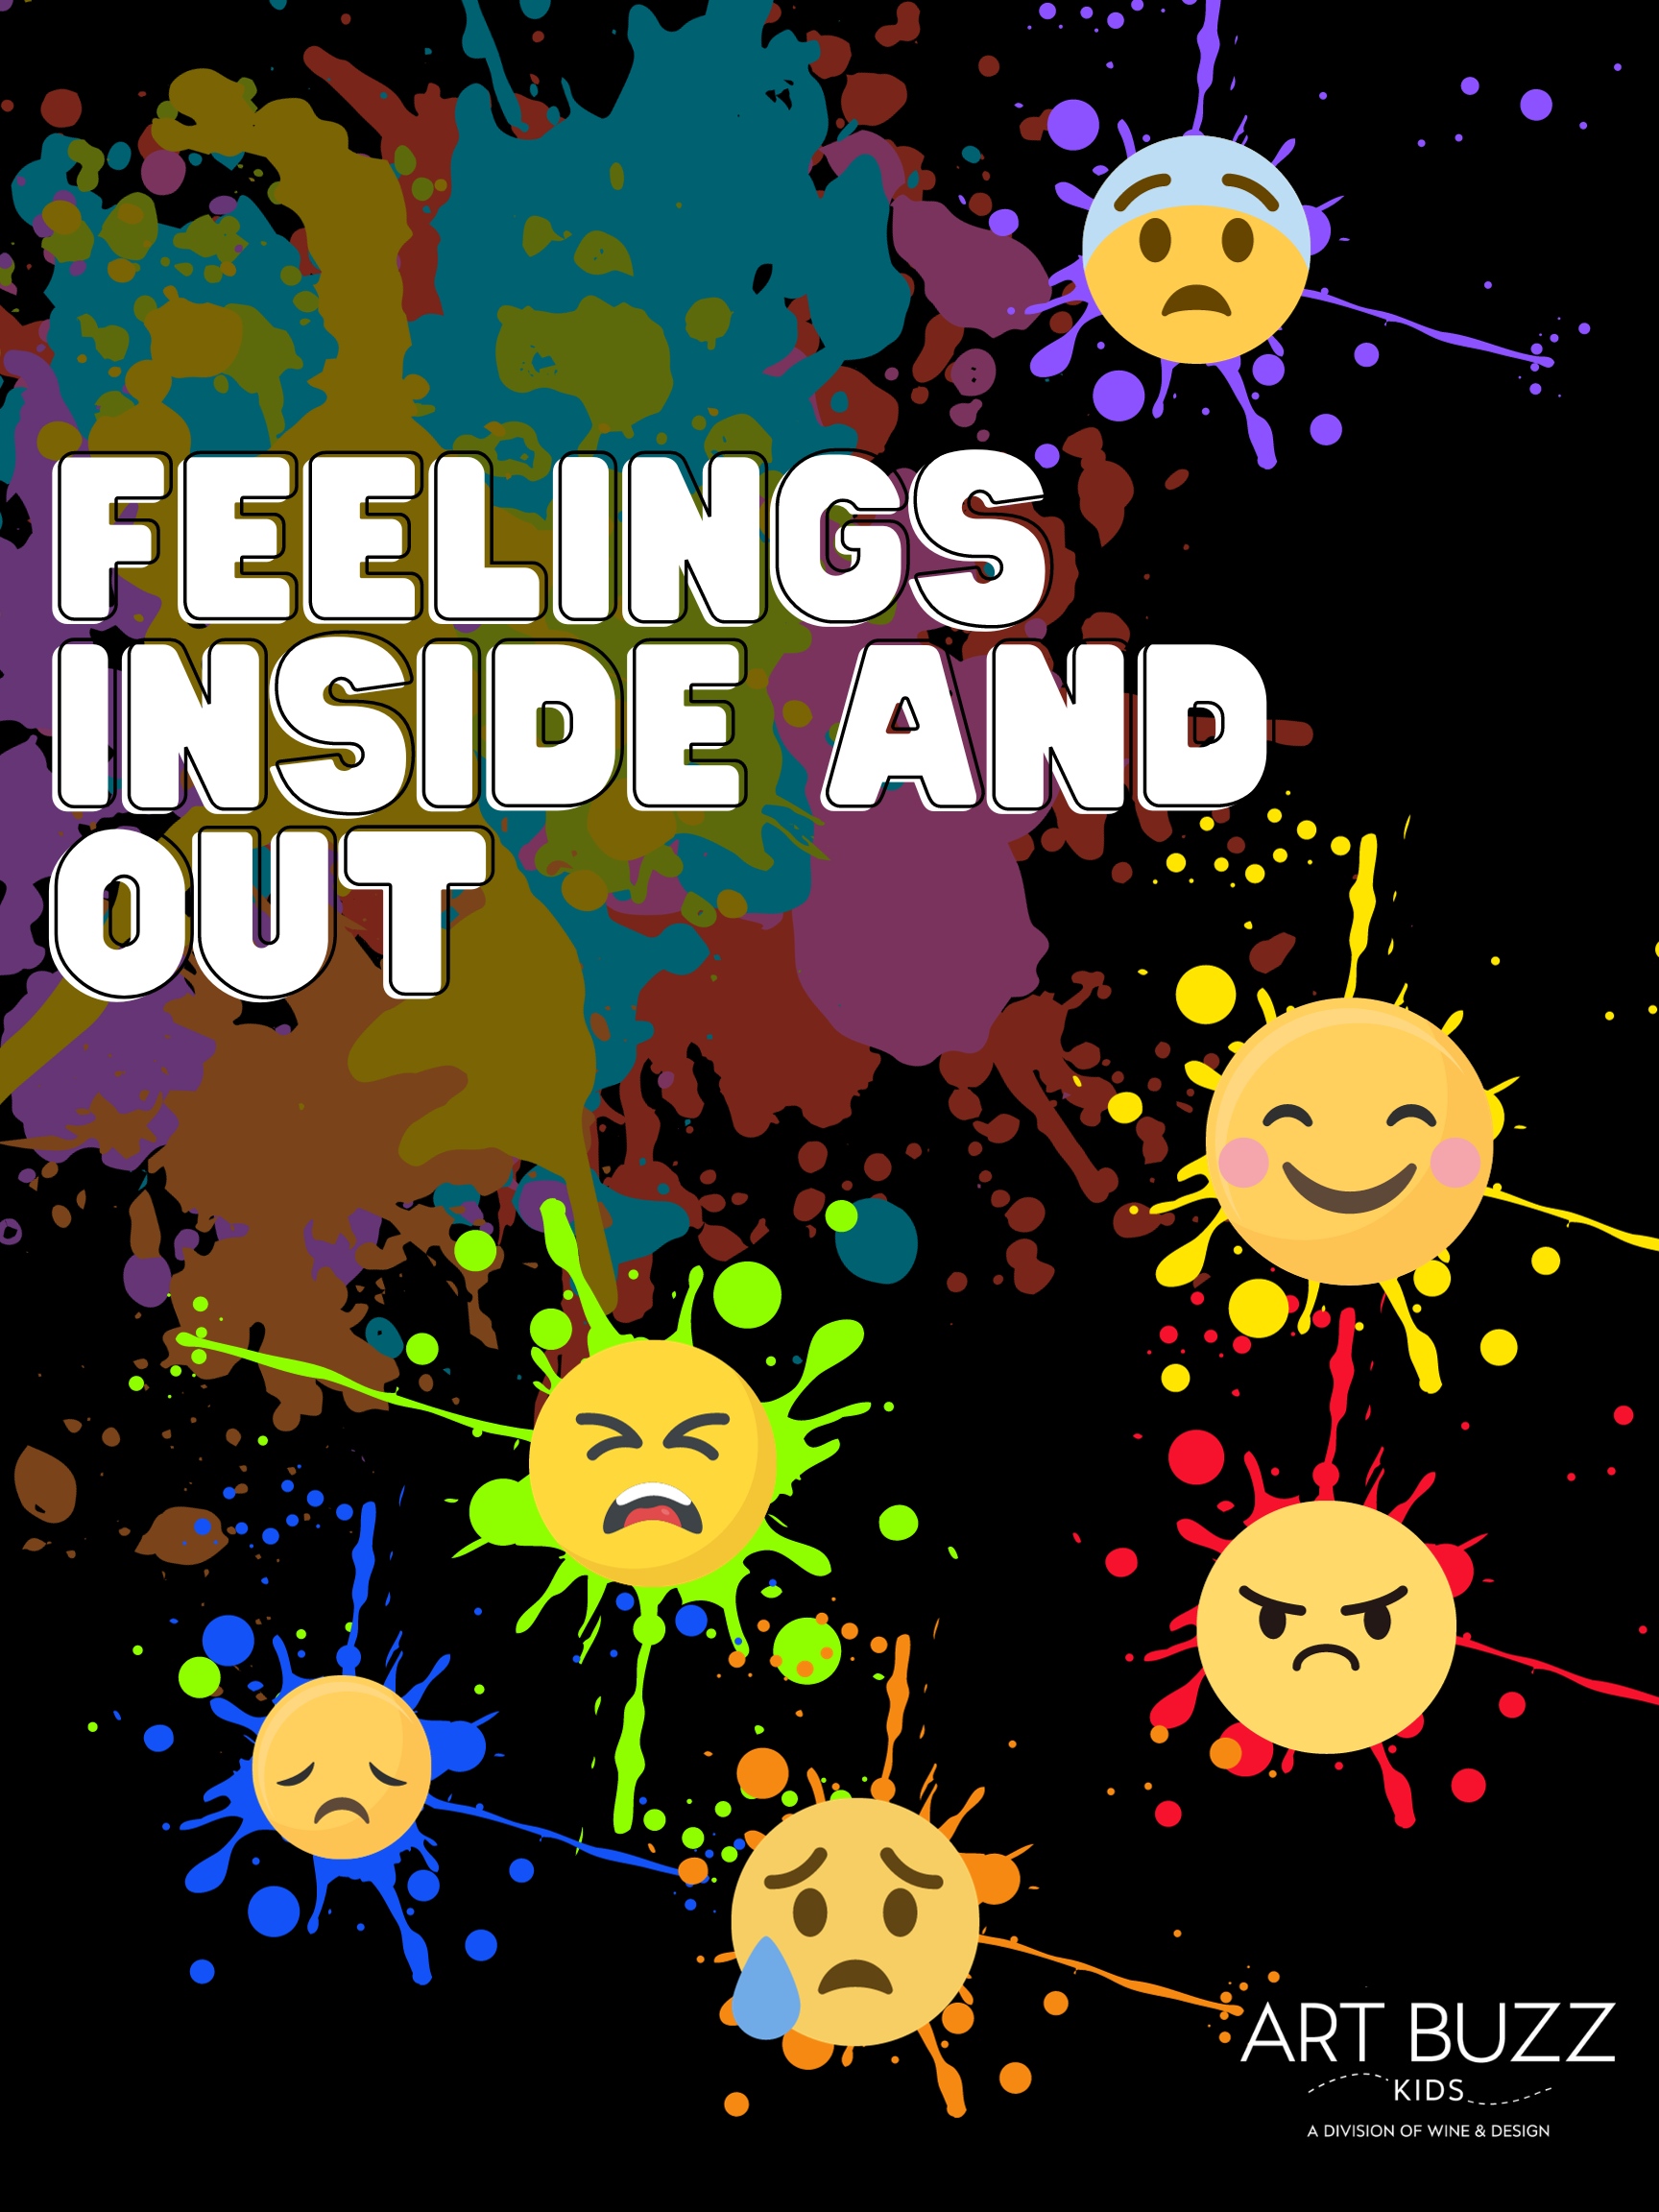 Art Buzz Kids | NEW! Feelings Inside and Out 